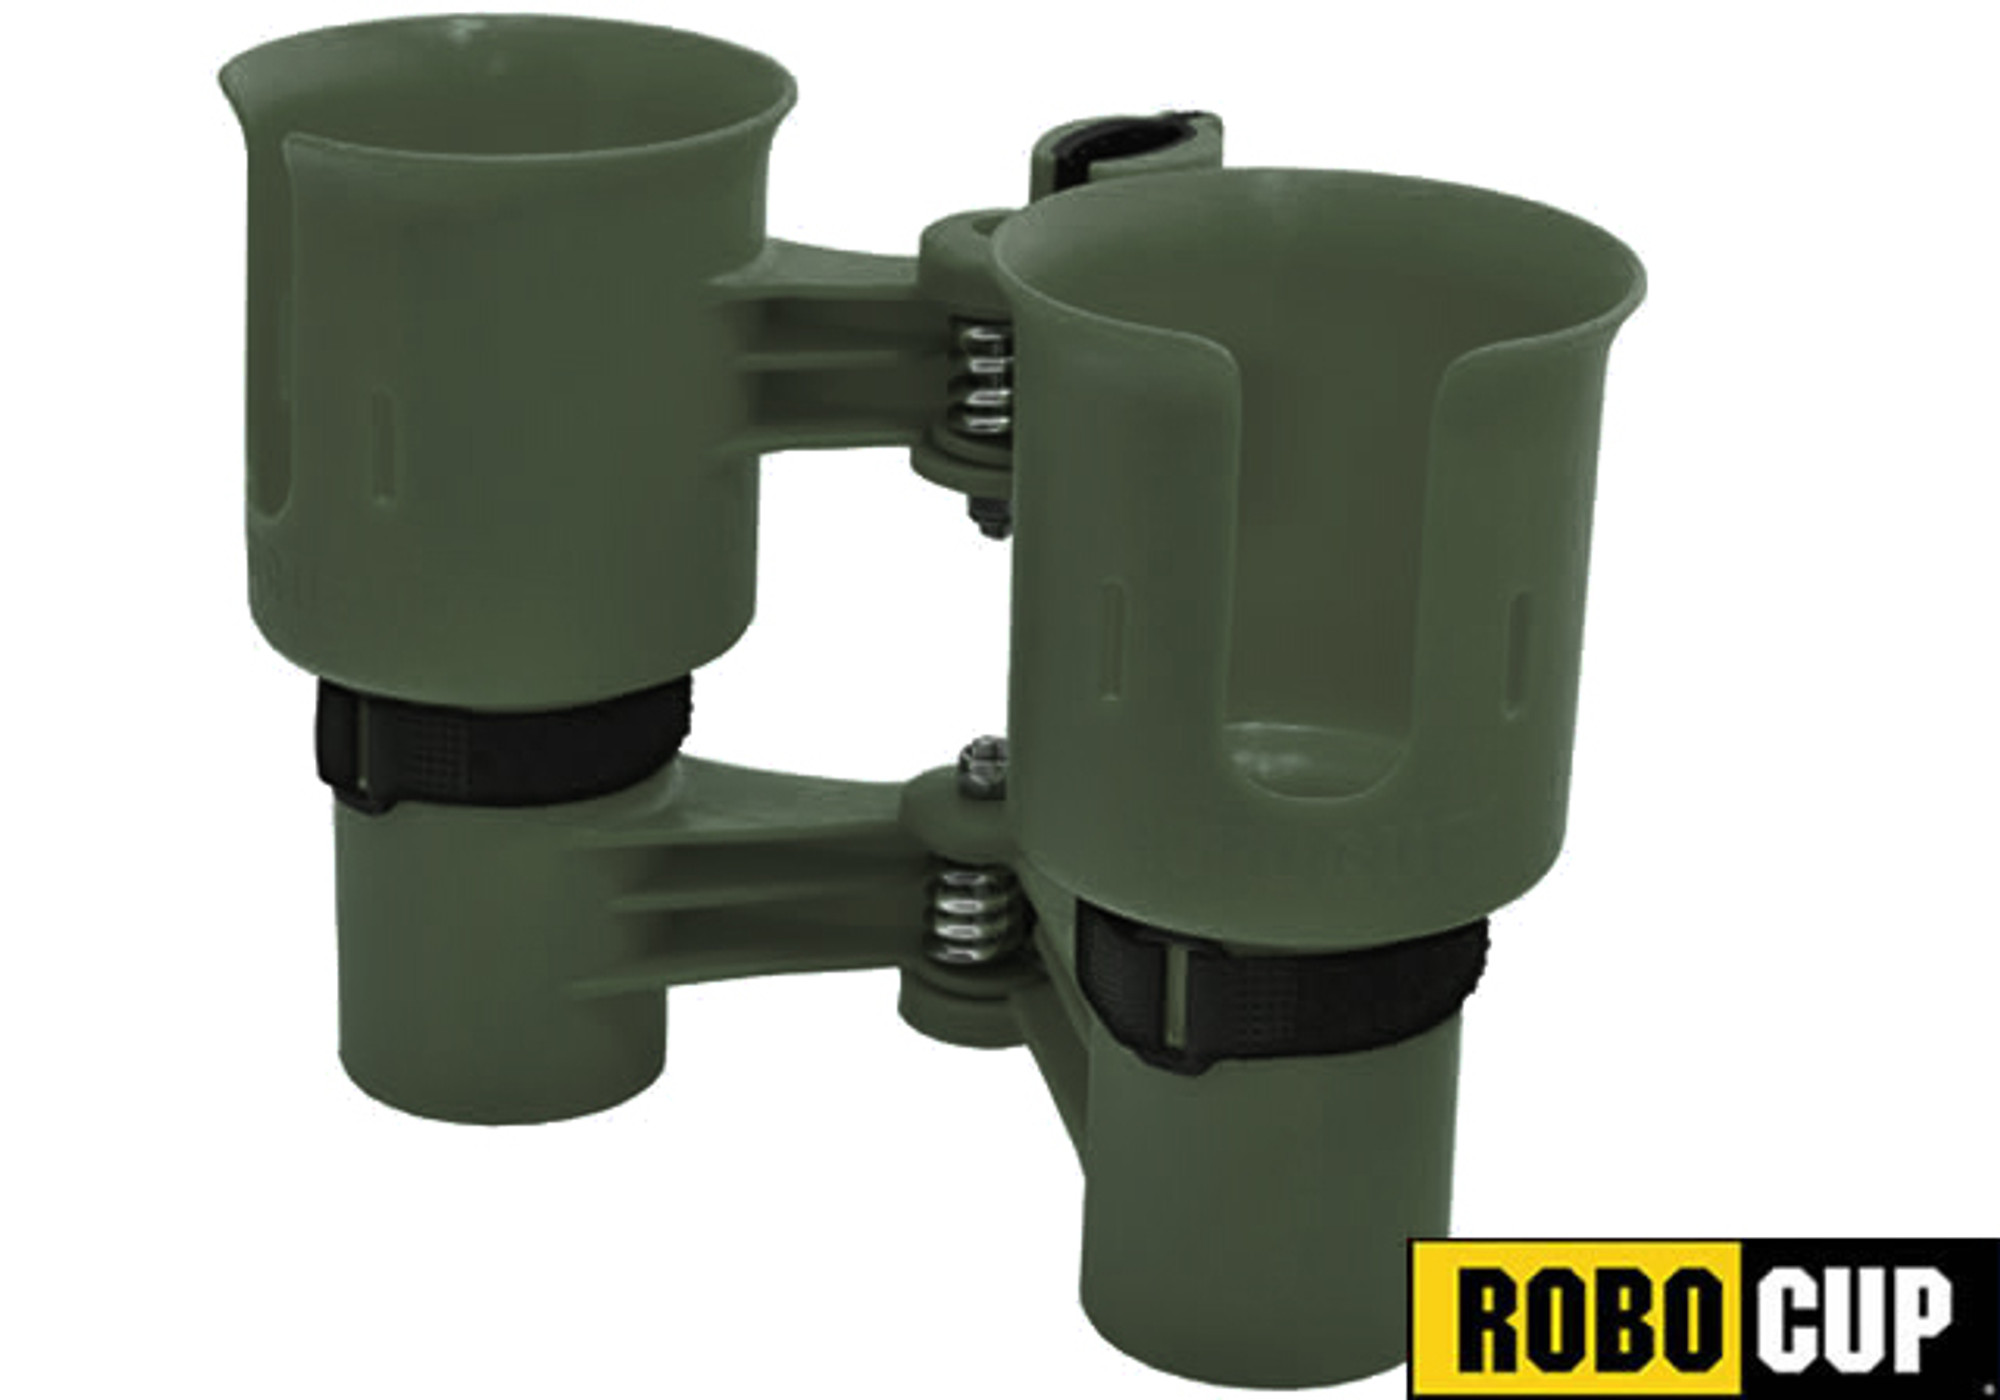 The RoboCup Portable Beverage Caddy (Color: Olive )